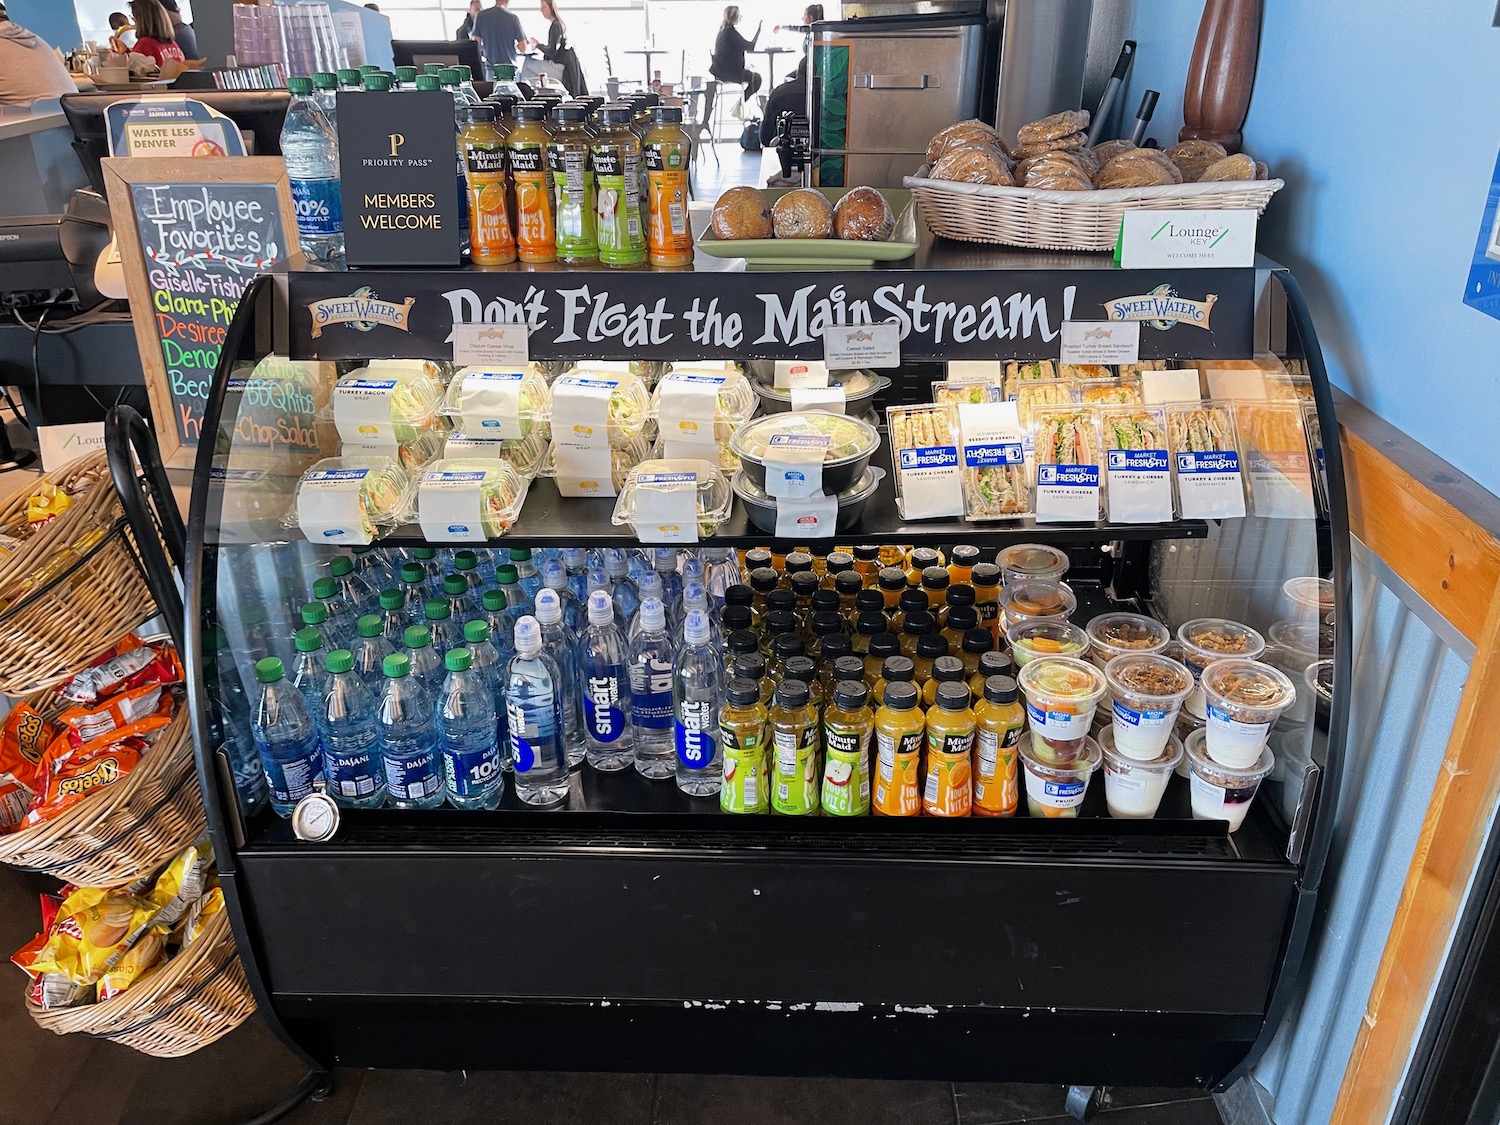 a display case with drinks and beverages